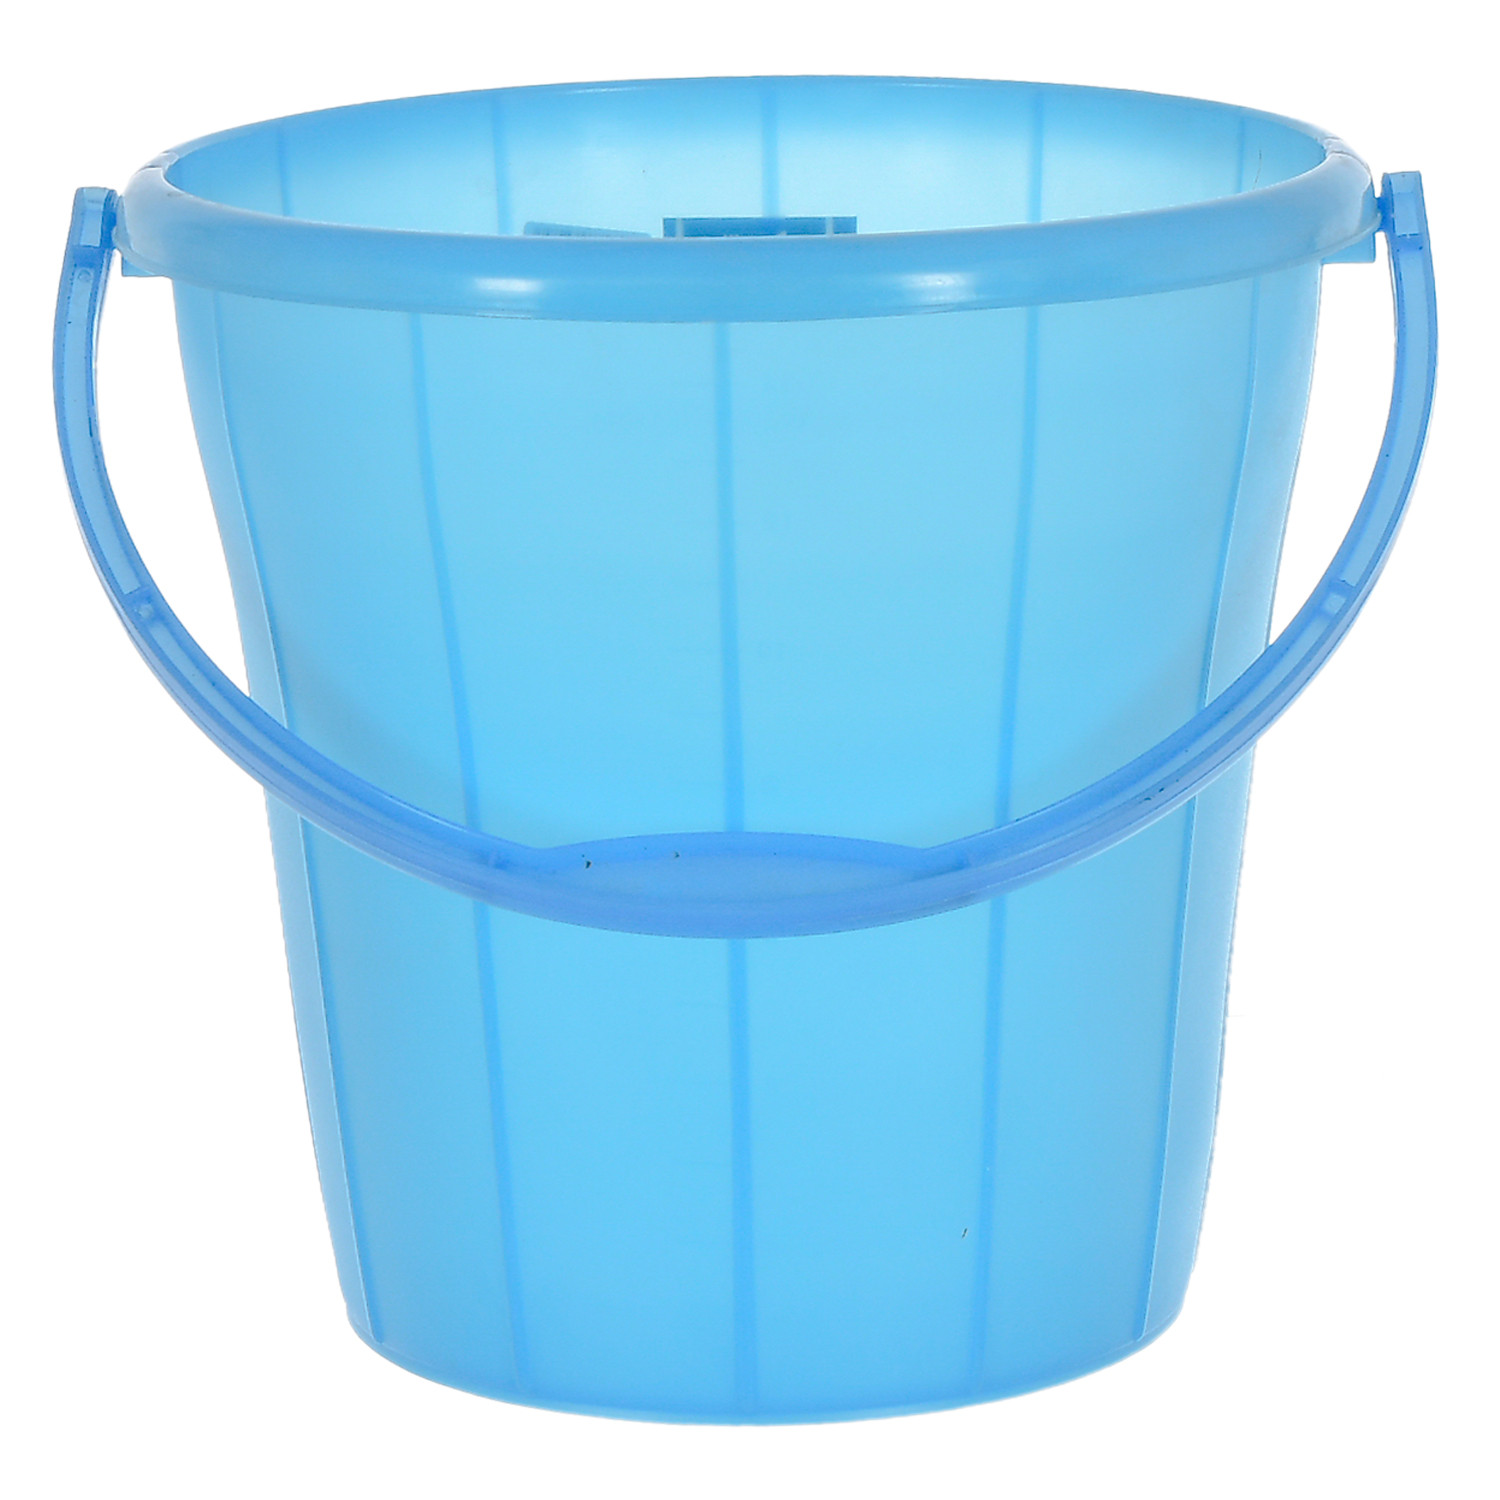 Kuber Industries Multiuses Plastic Bucket With Handle & Measuring Scale, 16 litre- Pack of 2 (Blue & Black)-46KM0331